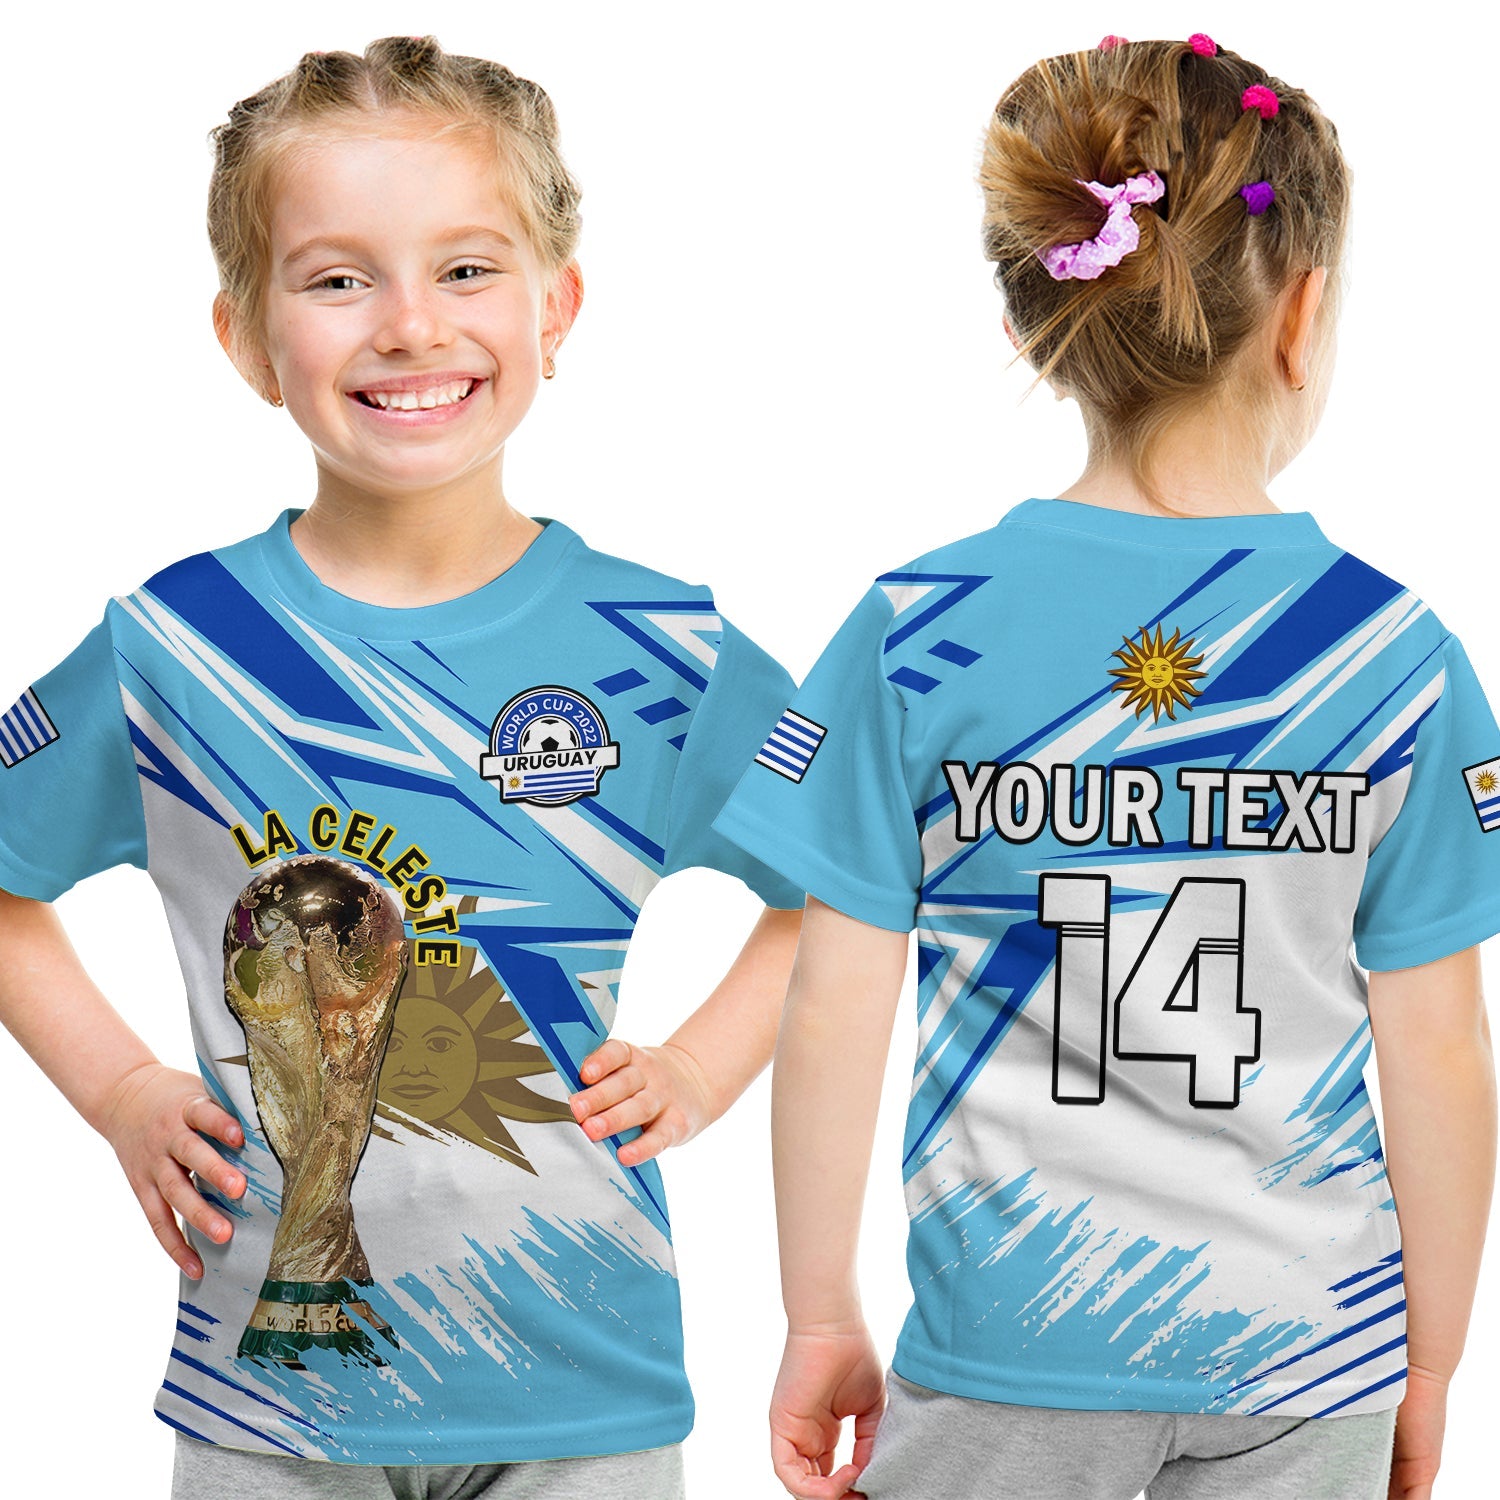 custom-text-and-number-uruguay-football-t-shirt-kid-la-celeste-wc-2022-sporty-style